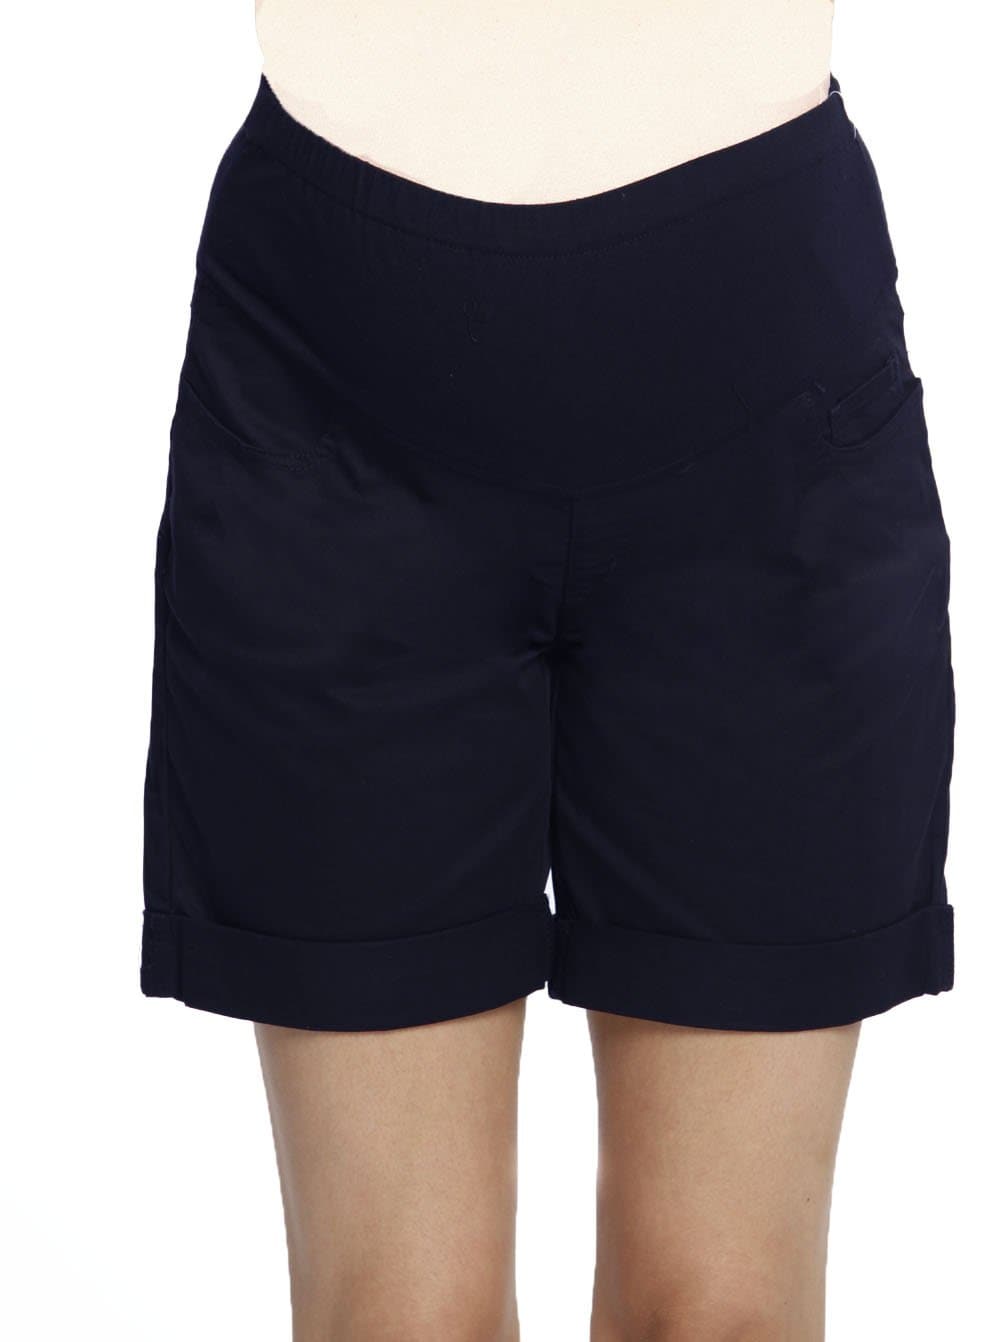 Cotton Maternity New Summer Shorts in Navy - Angel Maternity - Maternity clothes - shop online (1573893865575)